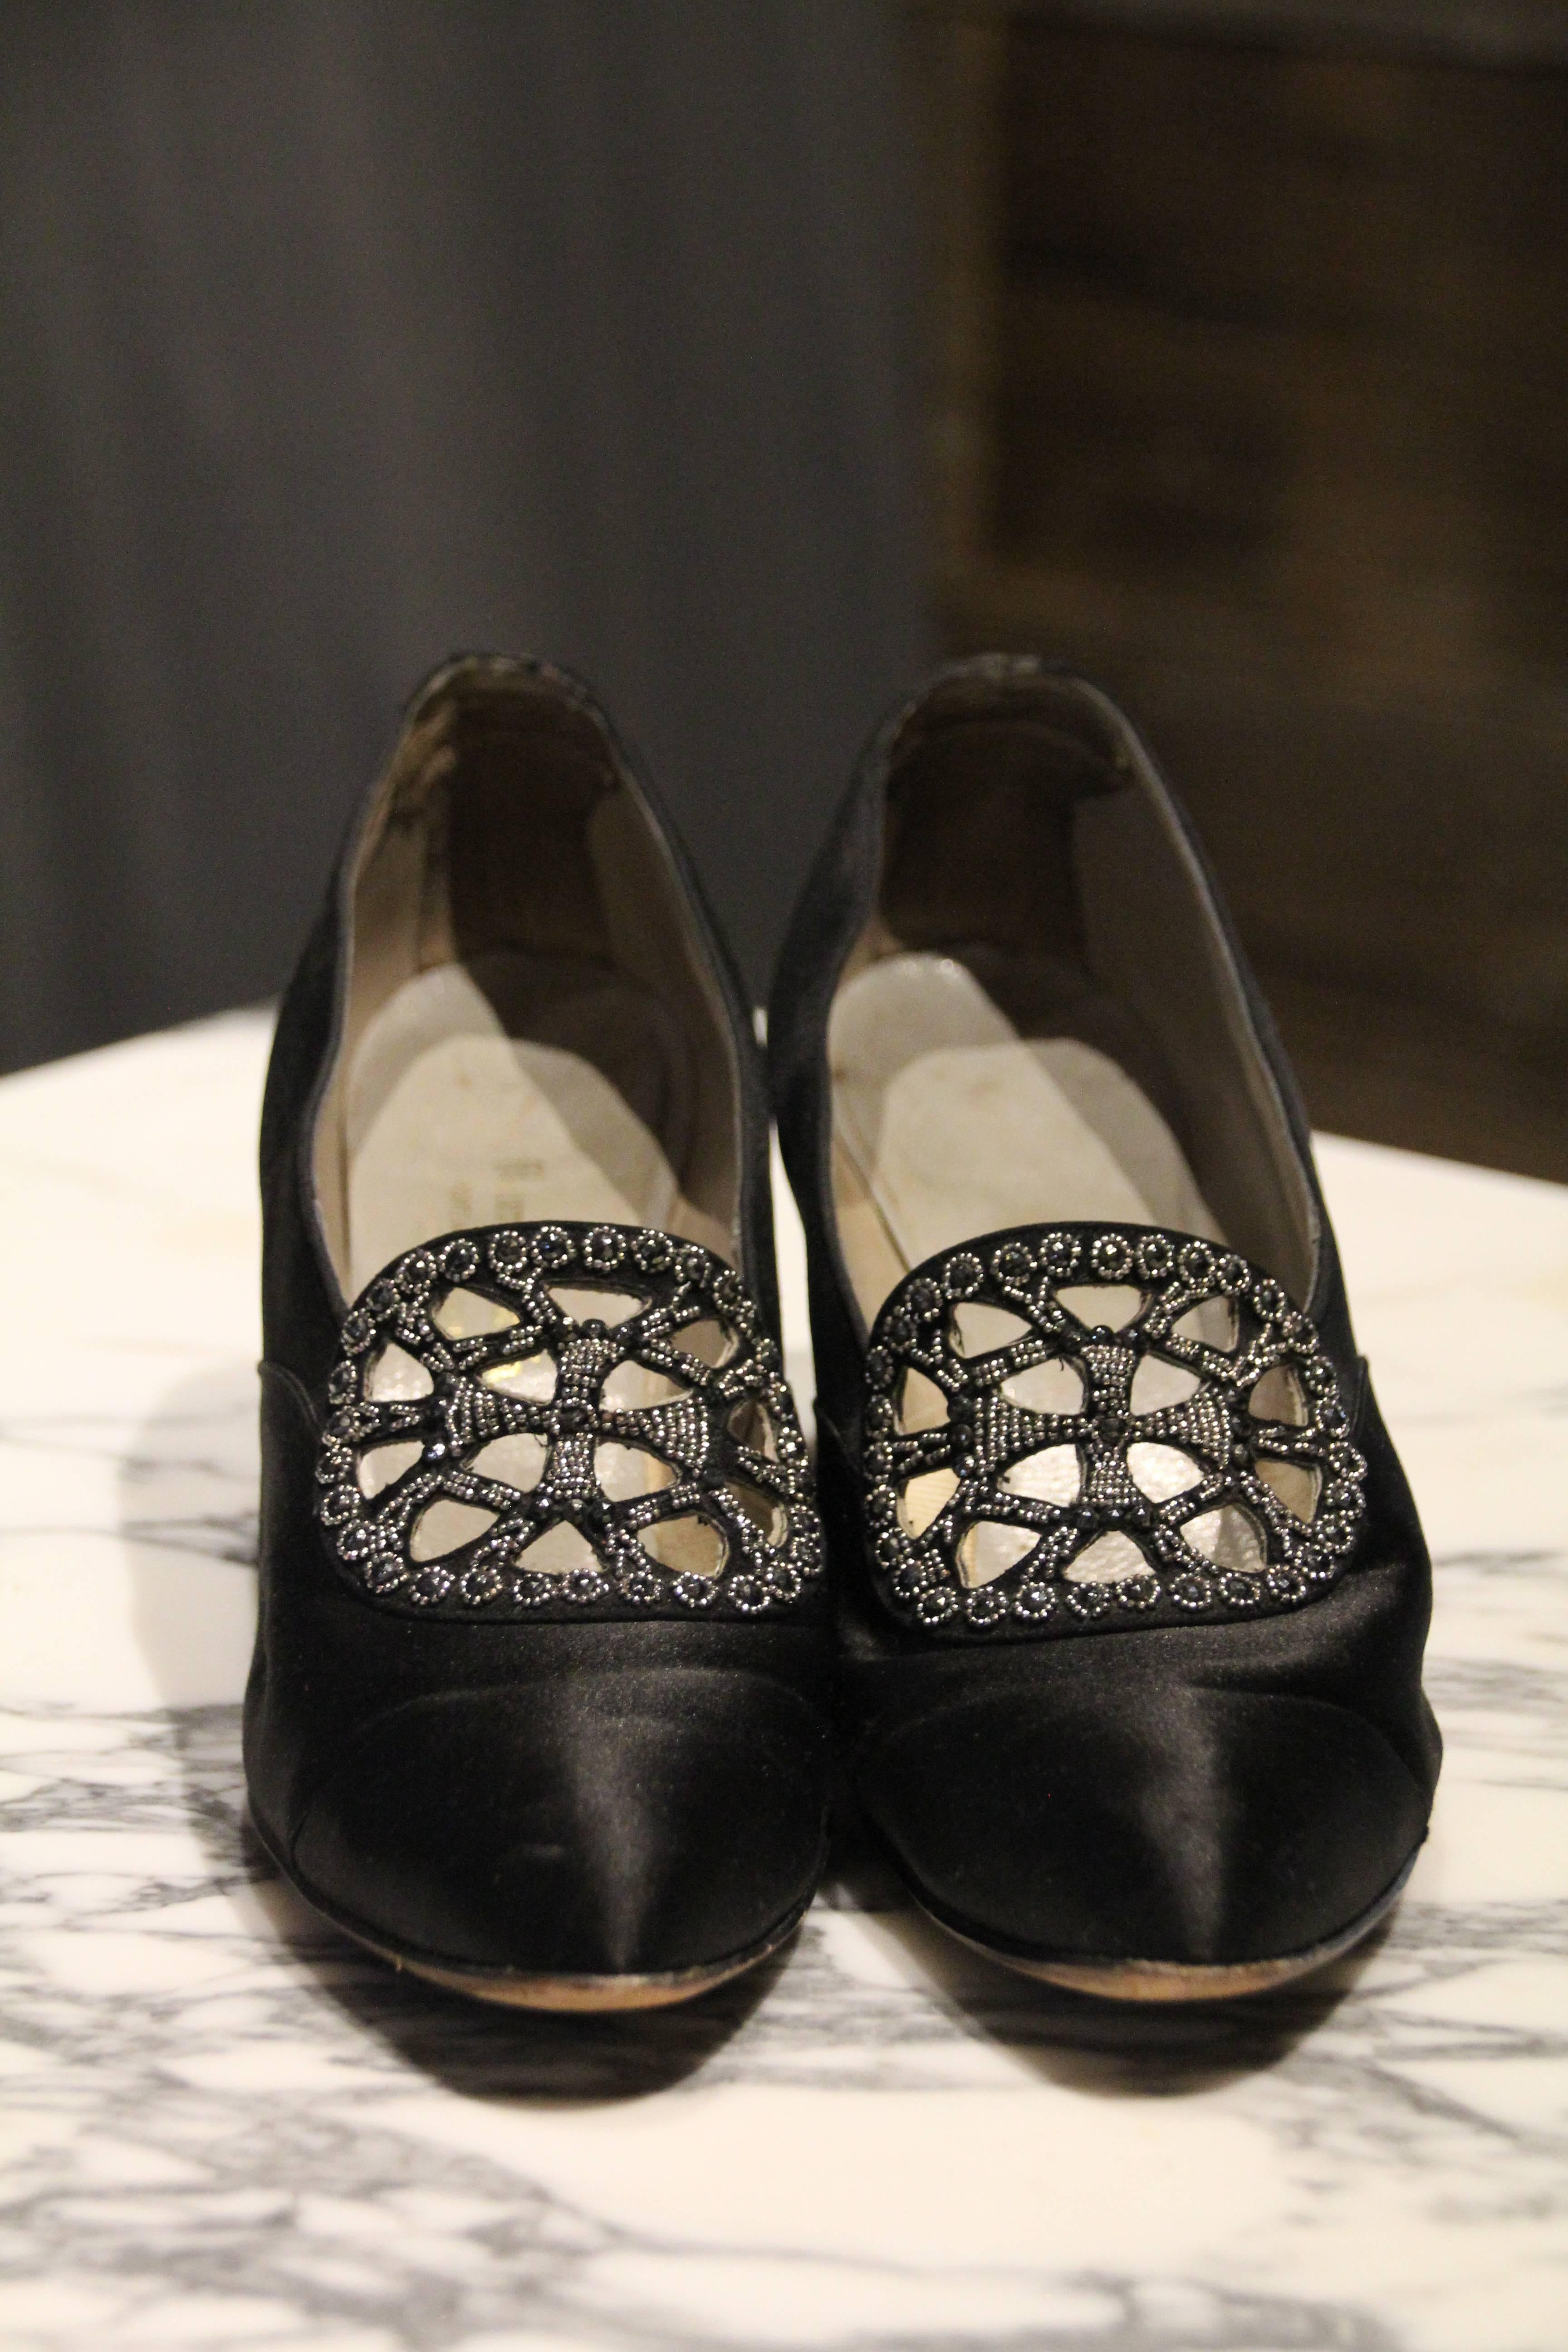 A beautiful Art Deco pair of 1920s Meier and Frank Co. French-made black peau de soie silk pump with a mid-height heel, slightly pointed toe and a beautiful peek-a-boo fan panel at the throat, covered in steel-cut marcasite beads.  Elegant and